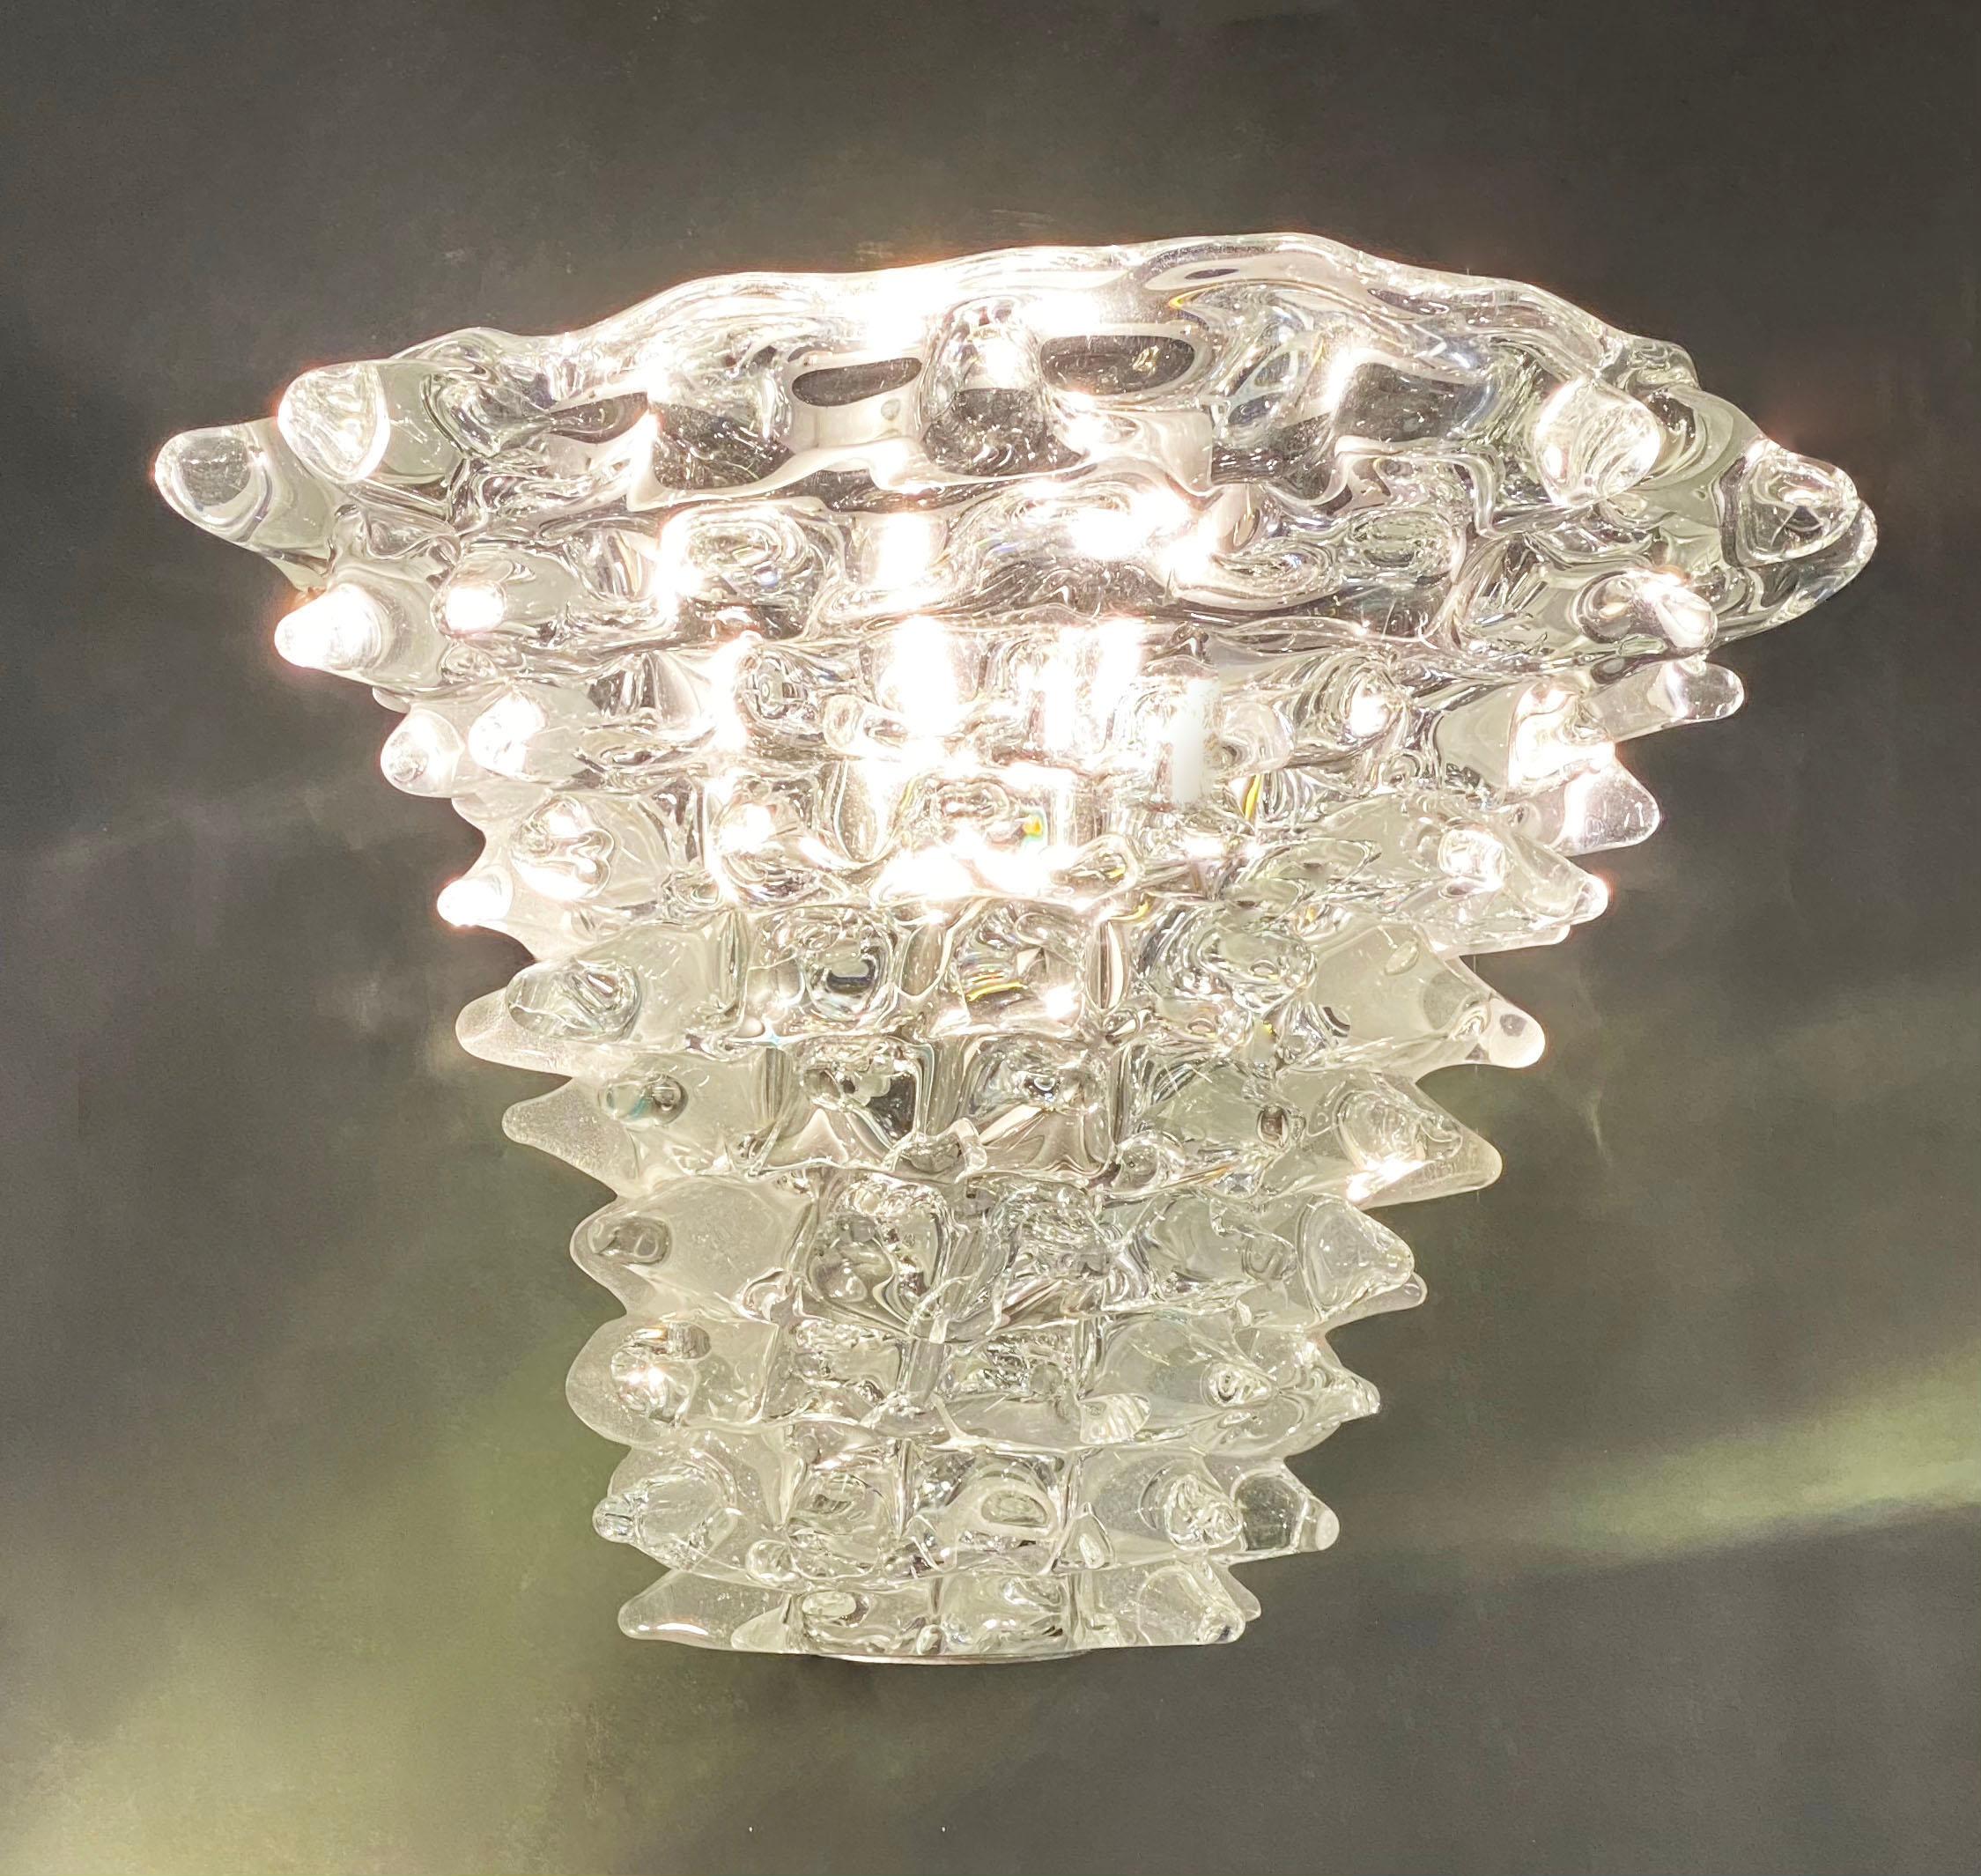 Hand-Crafted Italian Vintage Barovier Toso Crystal Textured Murano Glass Satin Silver Sconces For Sale